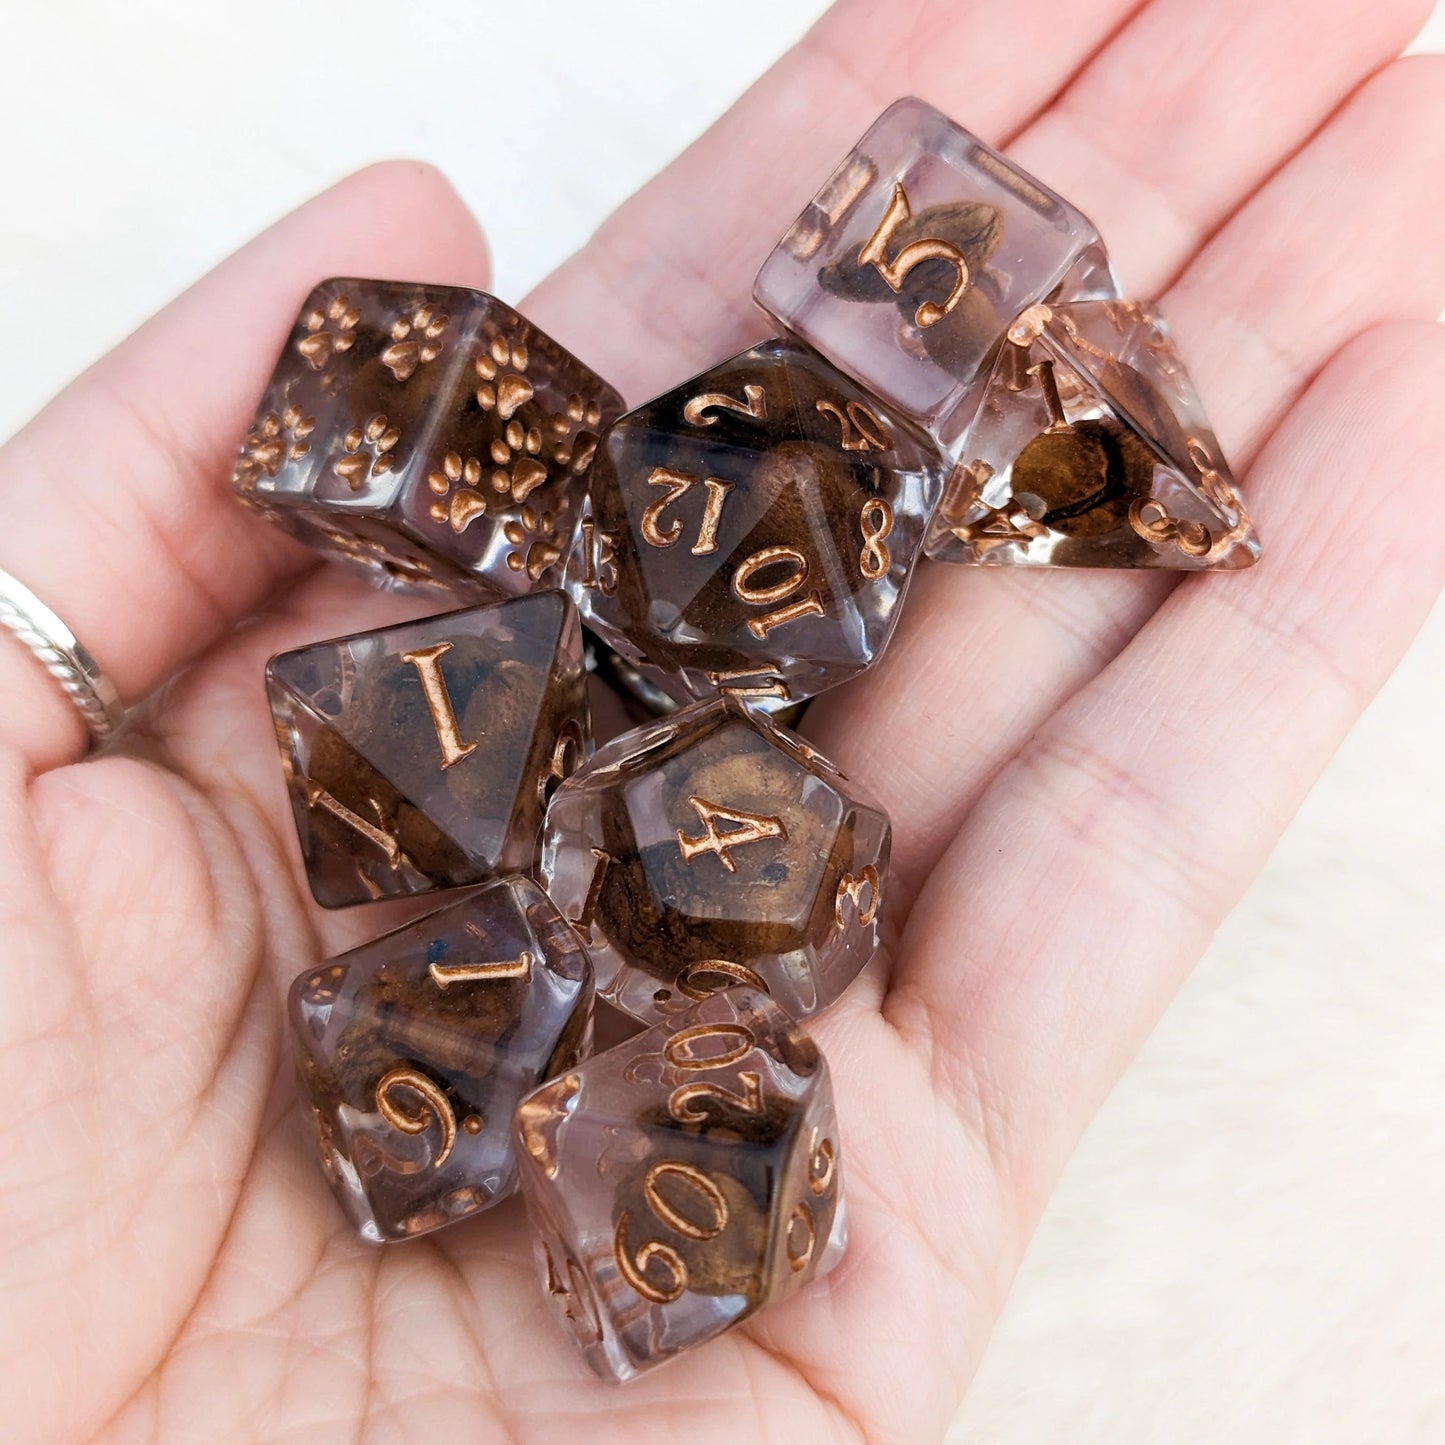 Coffee Beans (Updated) - 8 Dice Set - The Fourth Place